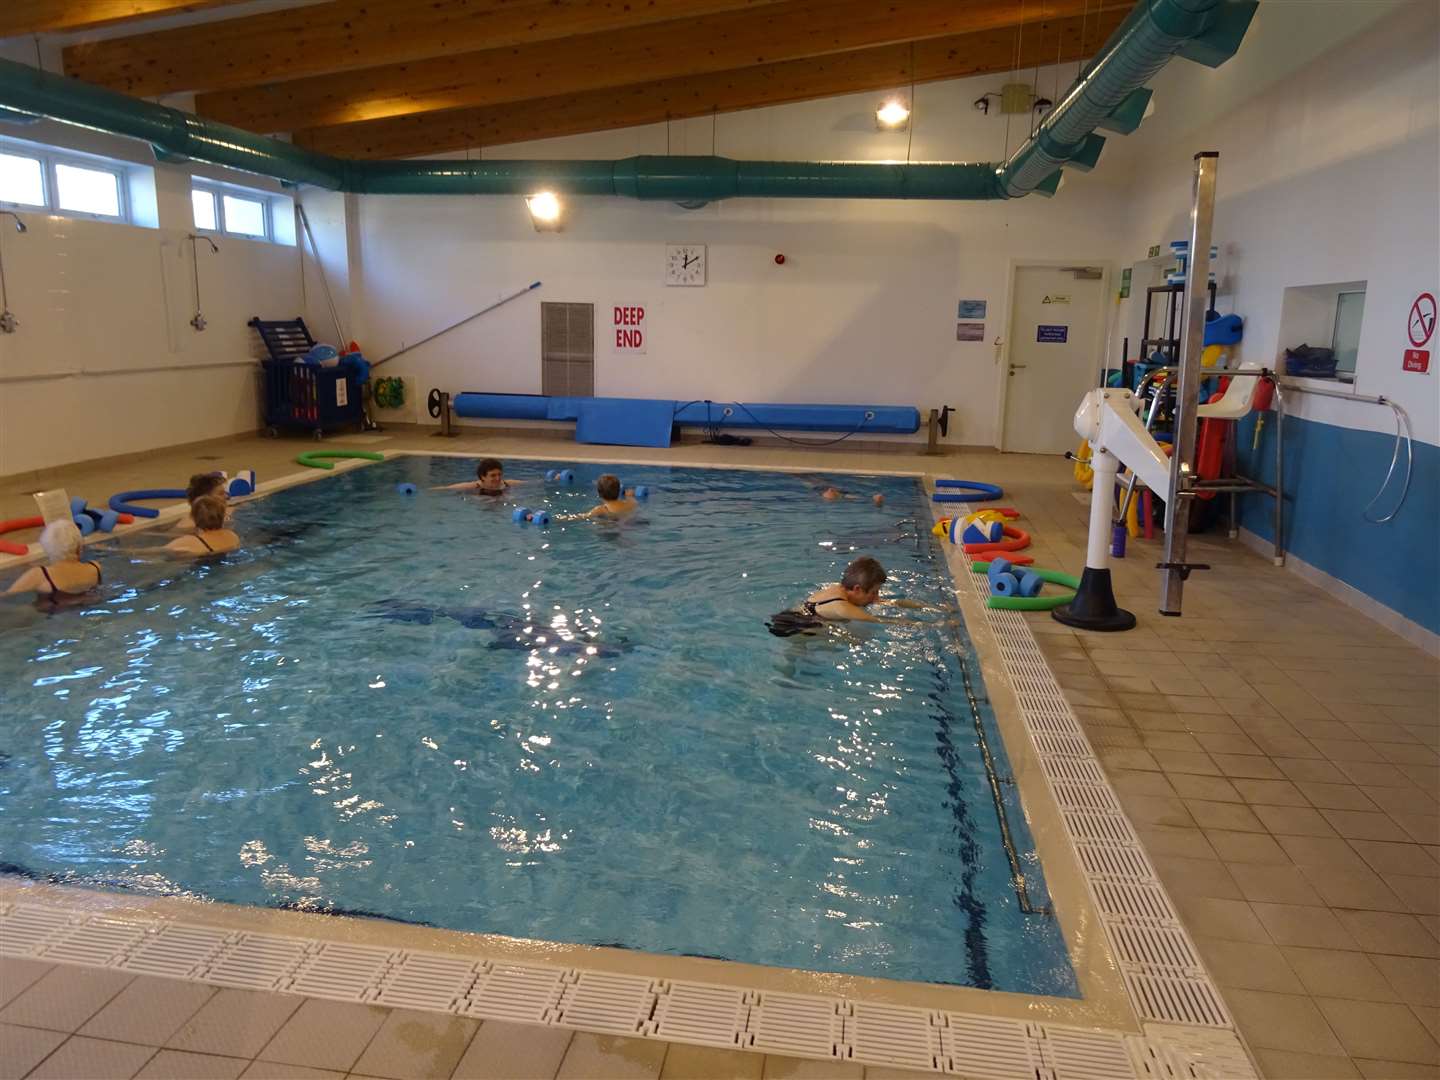 The Moray Hydrotherapy Pool, located beside Forres Swimming Pool, is set to reopen on October 11.